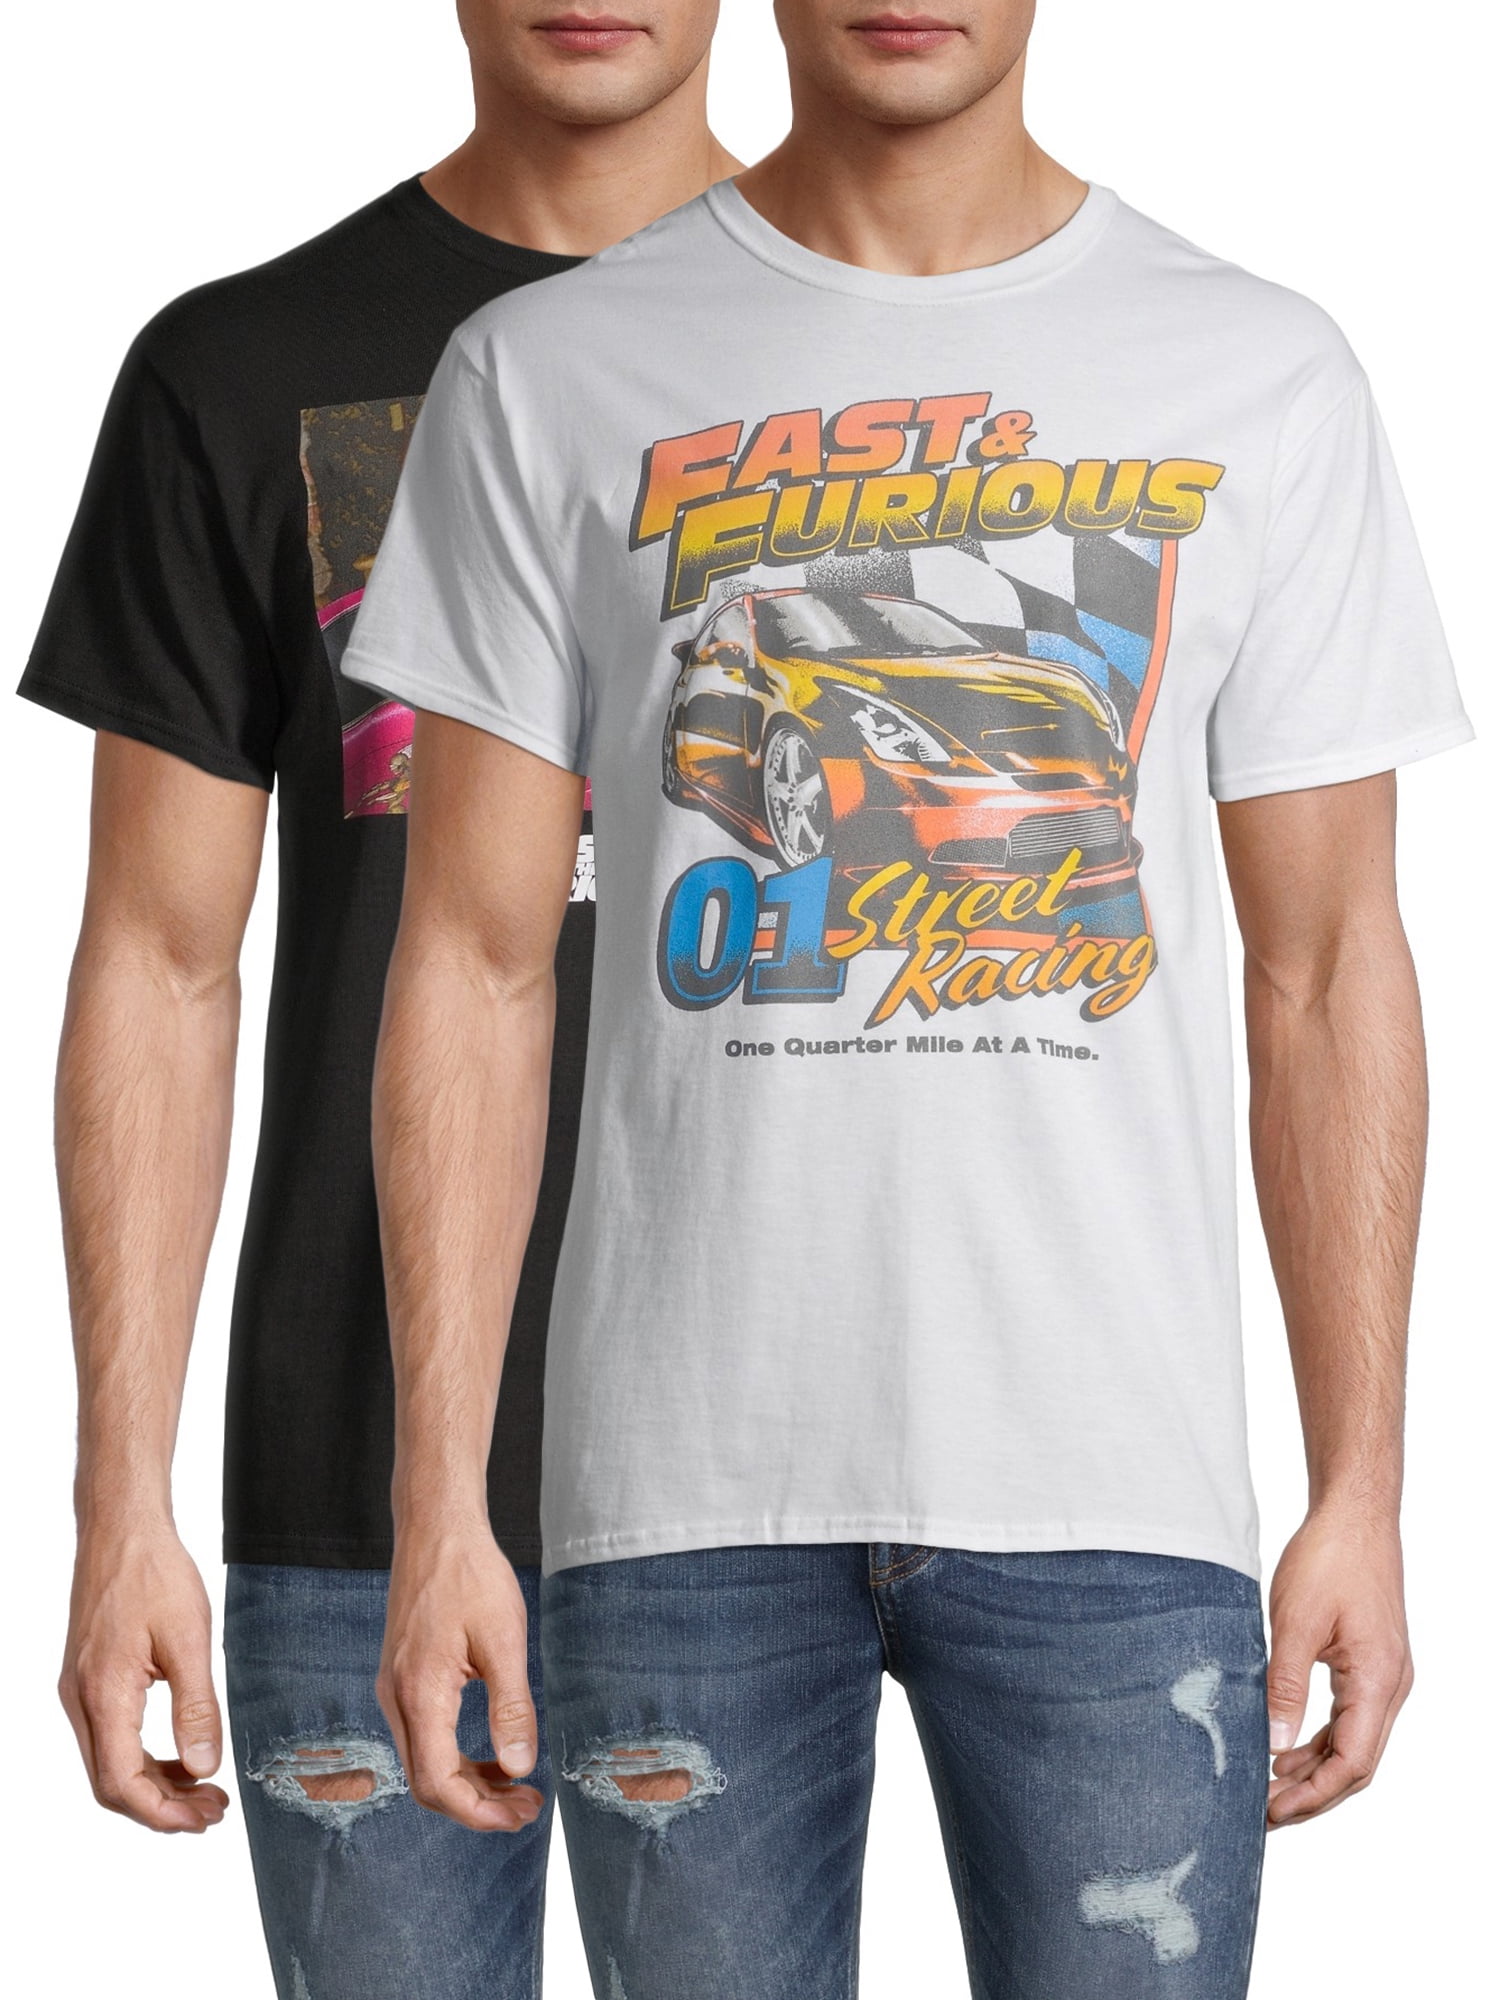 Fast and Furious Street Racing & Letty Men's and Big Men's Graphic T-Shirt,  2-Pack